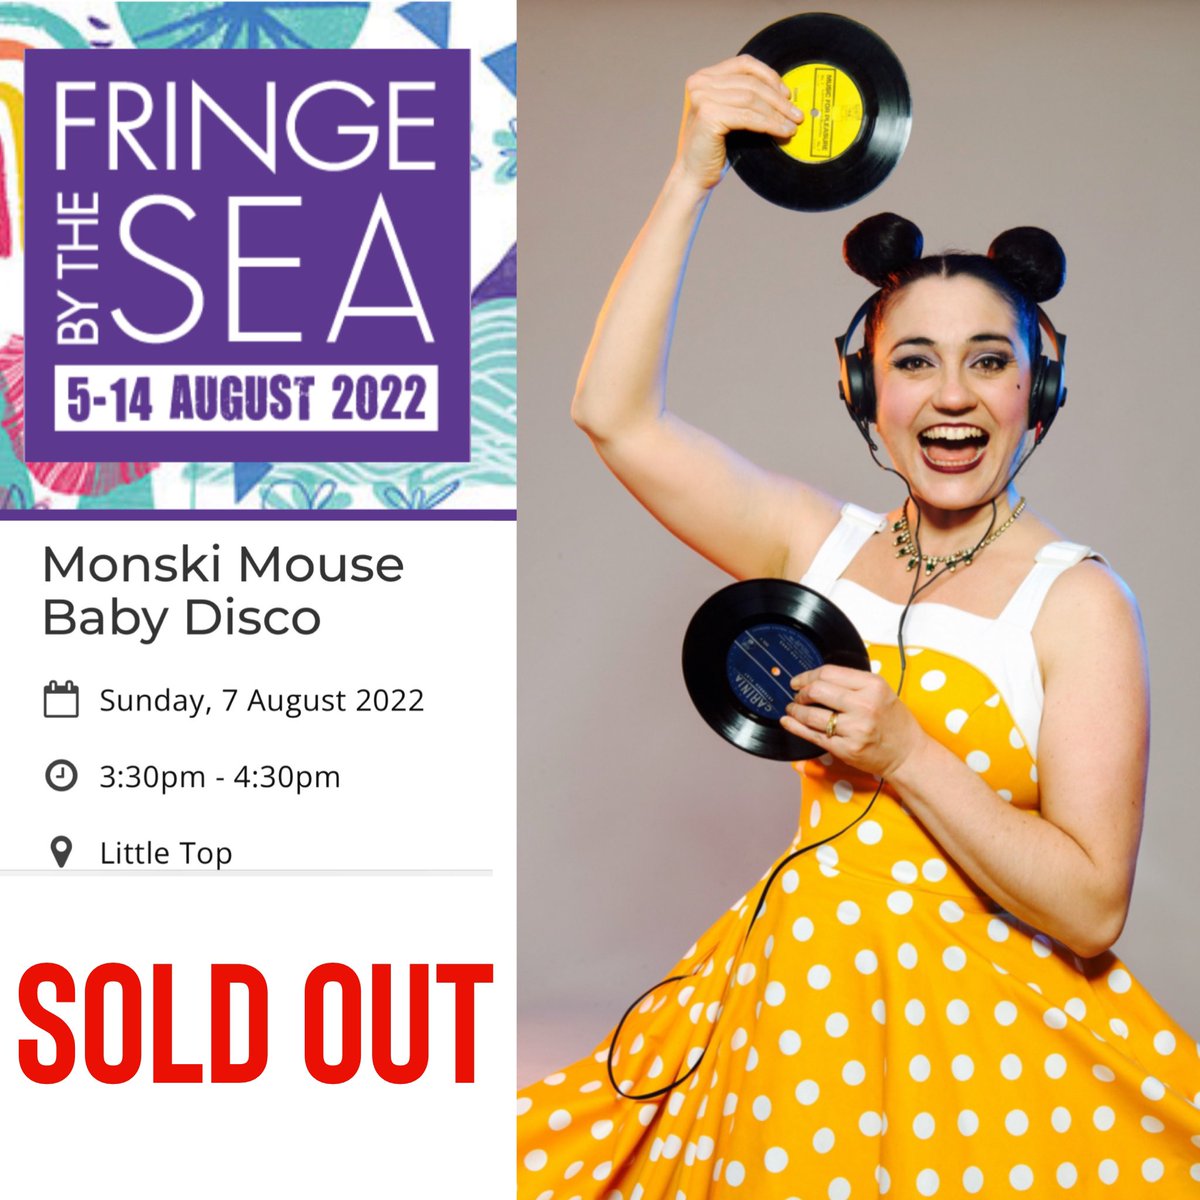 Our show at @fringebythesea2 is now sold out!! Book now for @UnderbellyFest & @AssemblyFest at @edfringe